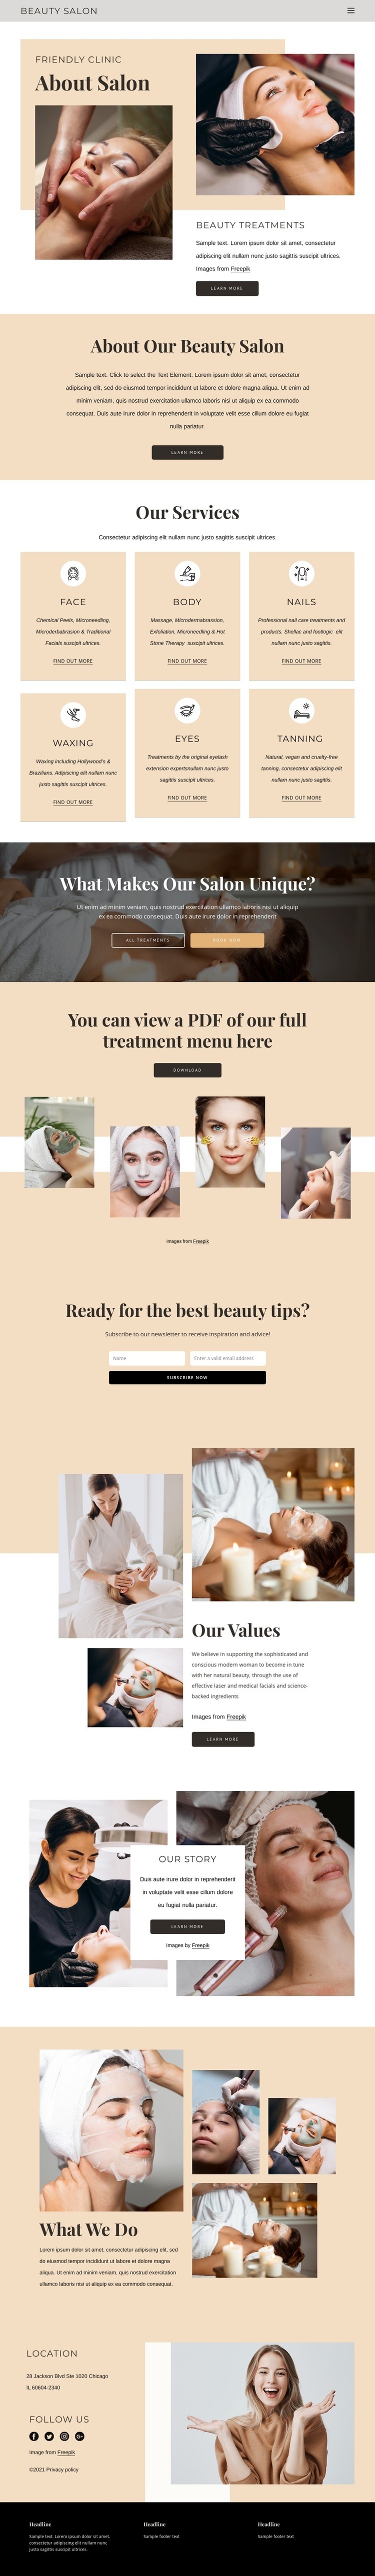 Beauty and aesthetic treatments Wix Template Alternative